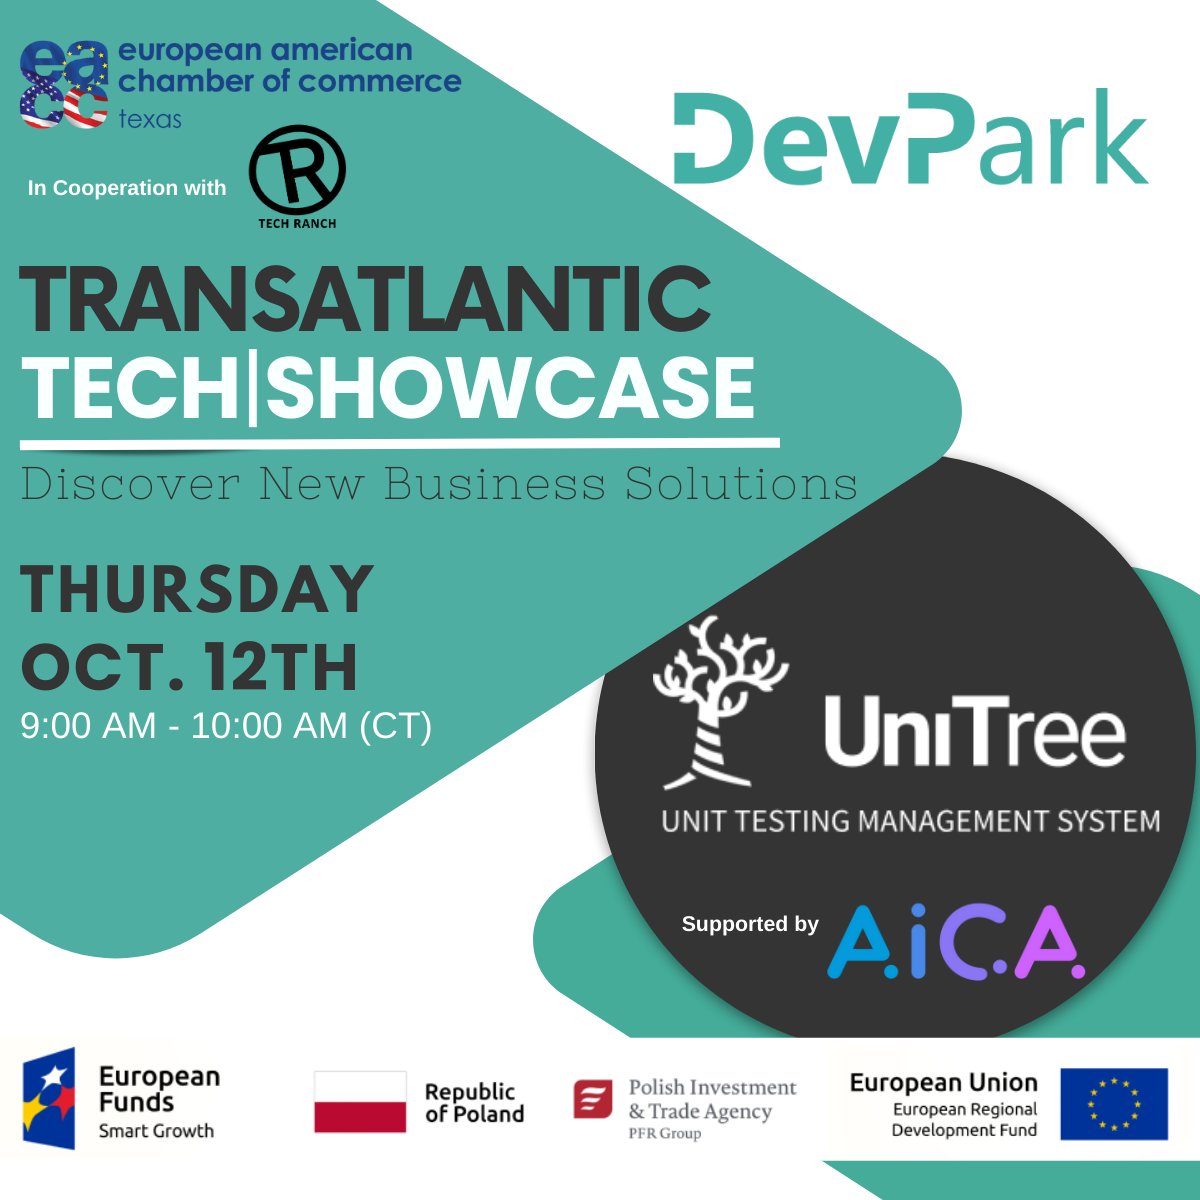 The @EaccTexas in cooperation with @TechRanch will host a live presentation on Thursday, October 12th with the attendance of Andrzej Fenzel and Bartosz Kamiński of DevPark.

You can register for the free live presentation here: members.eacctx.com/events/Details…